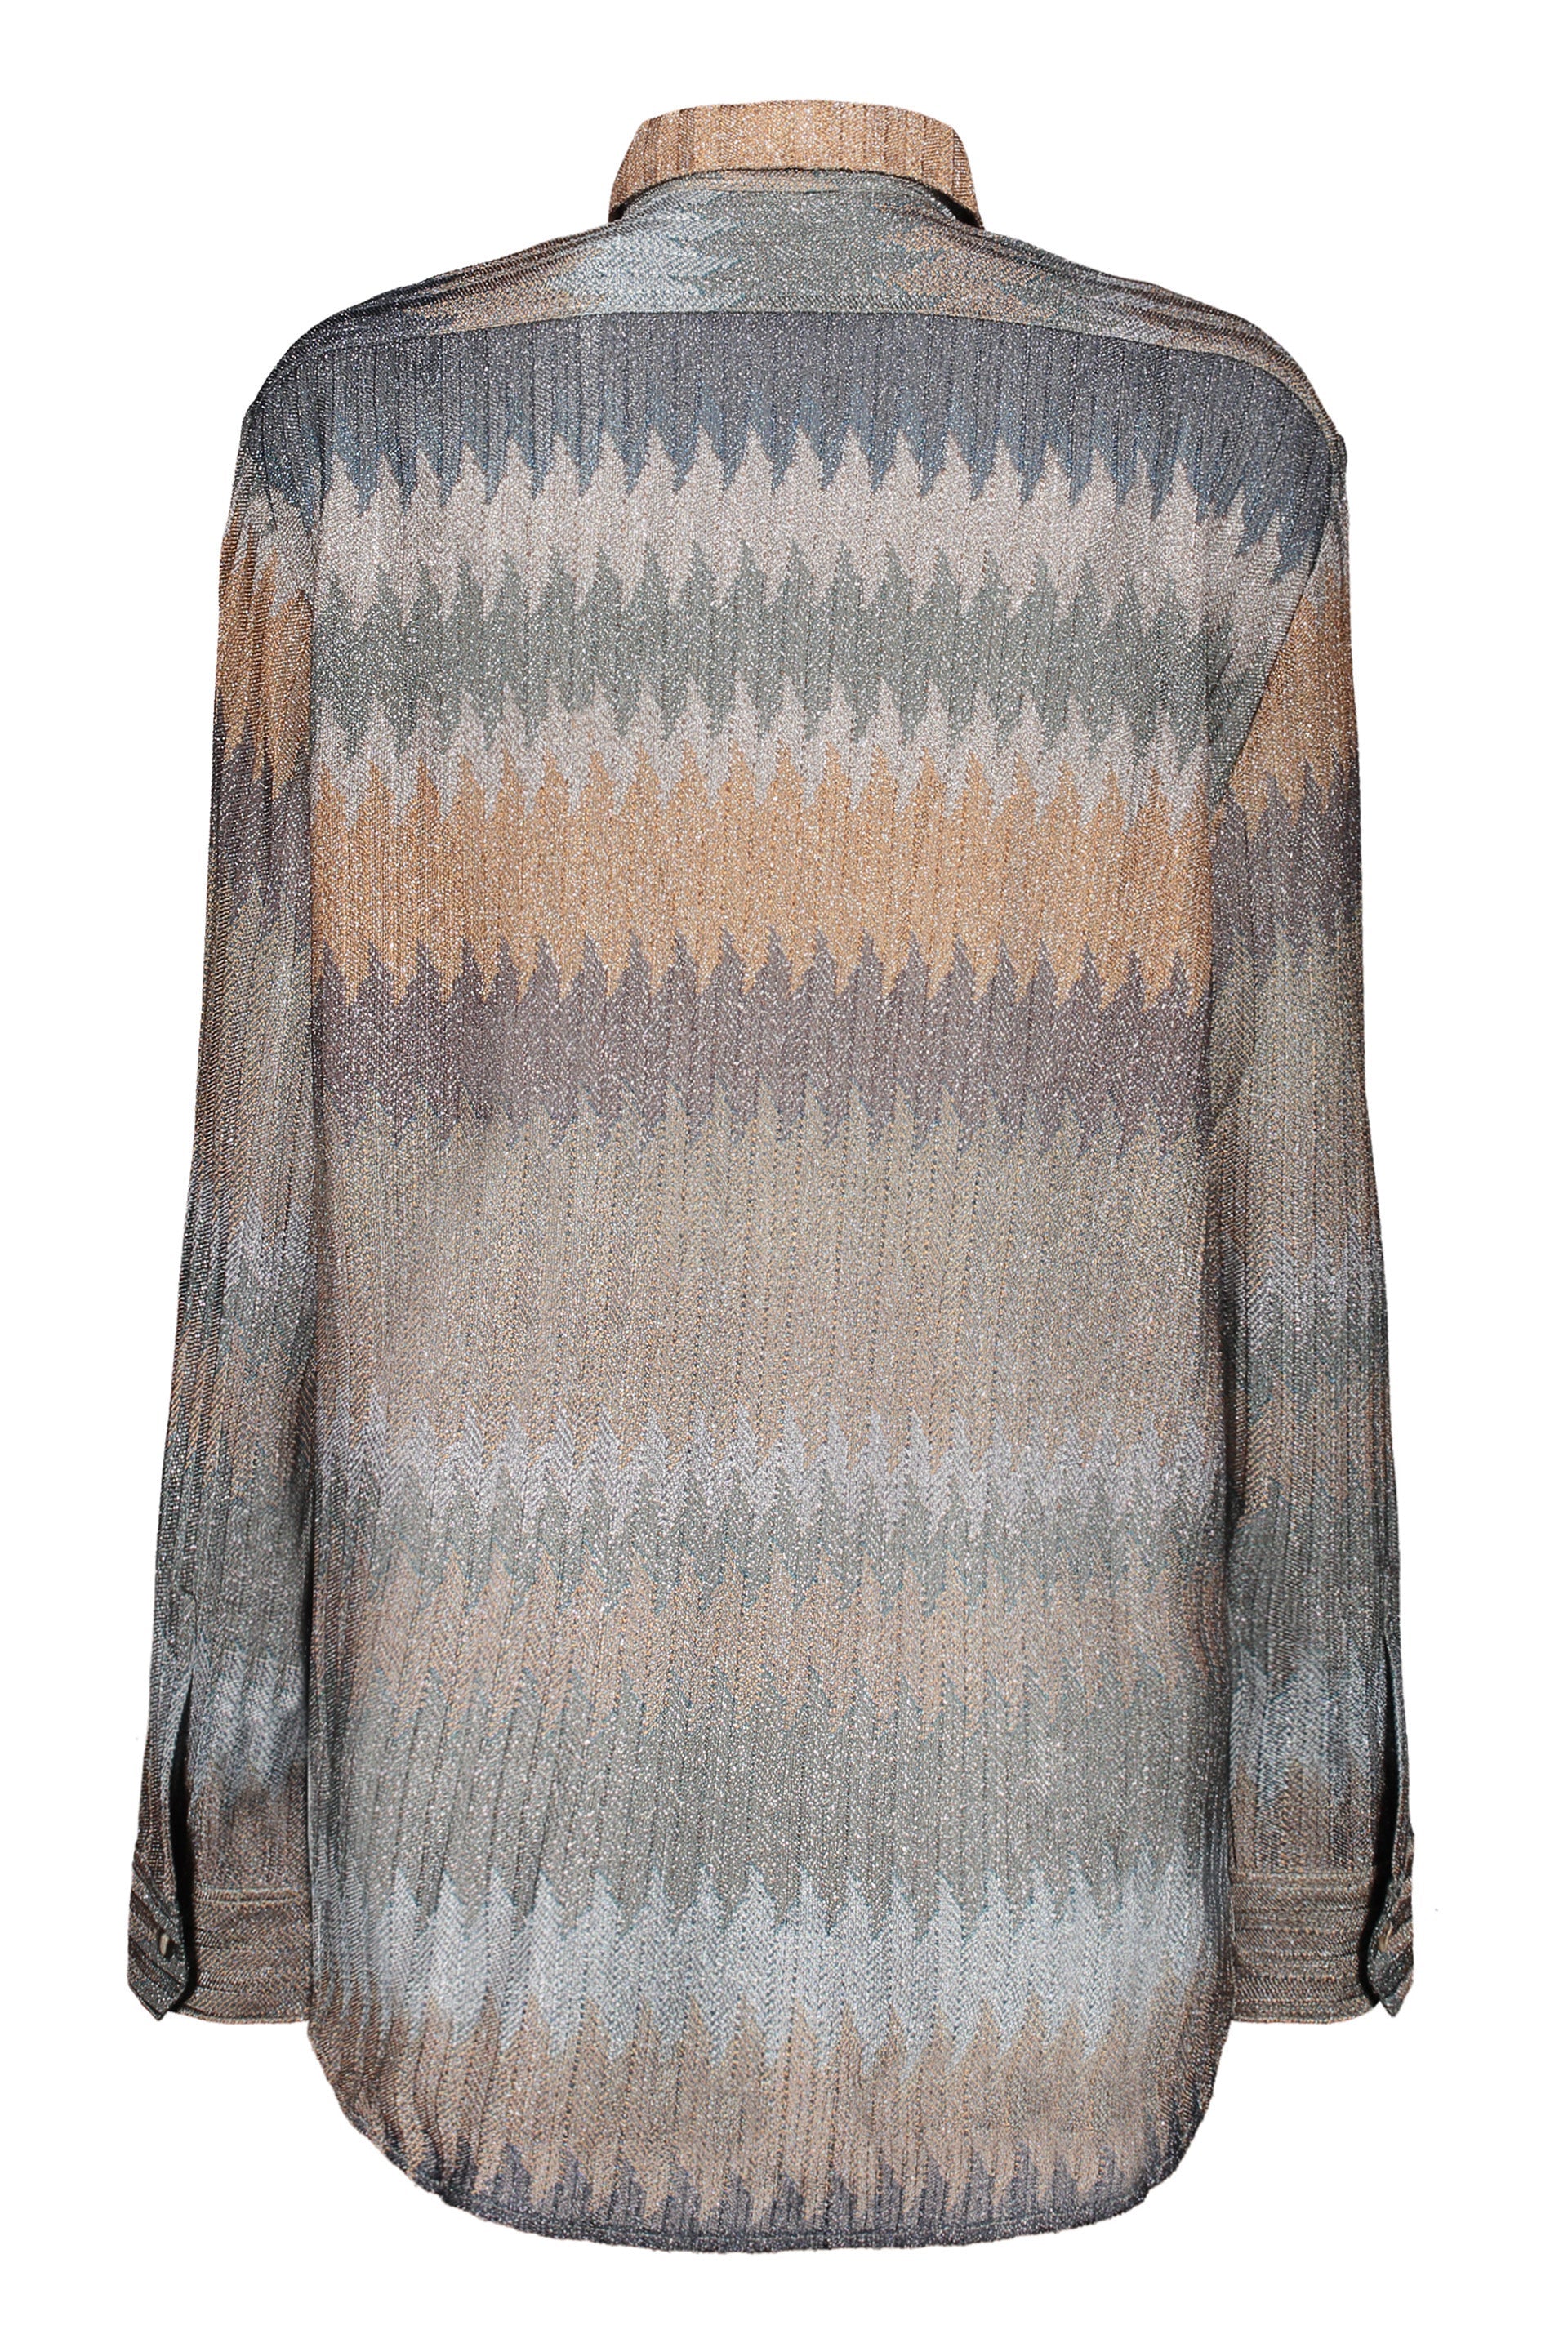 Missoni-OUTLET-SALE-Viscose-knit-shirt-Shirts-ARCHIVE-COLLECTION-2.jpg